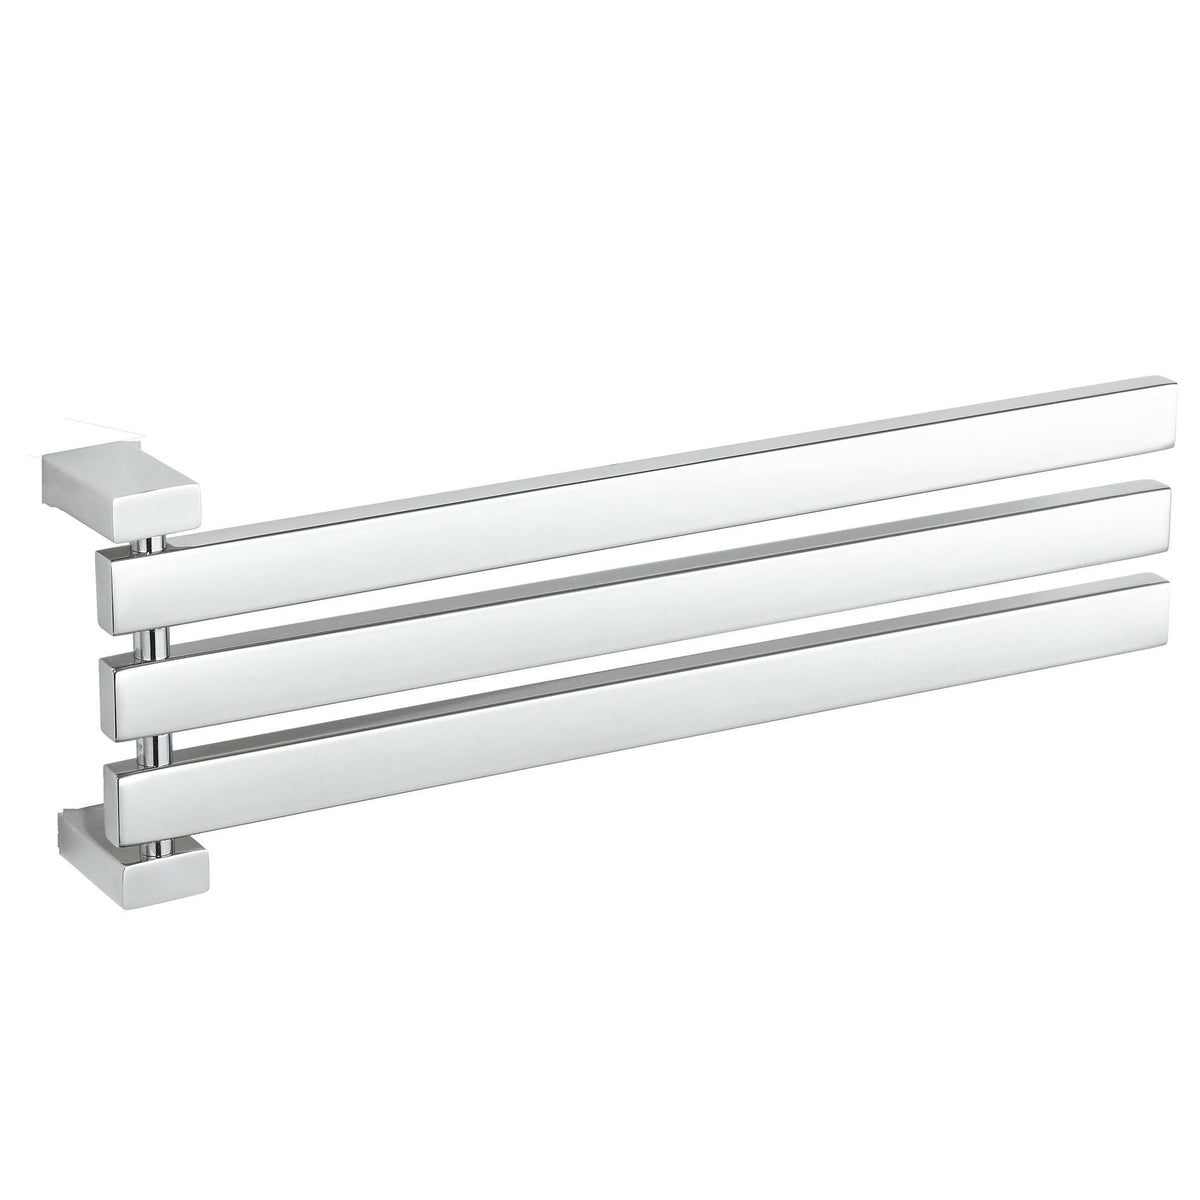 Enzo Contemporary Stainless Steel Adjustable 3 Swing Arm Towel Rack, Chrome